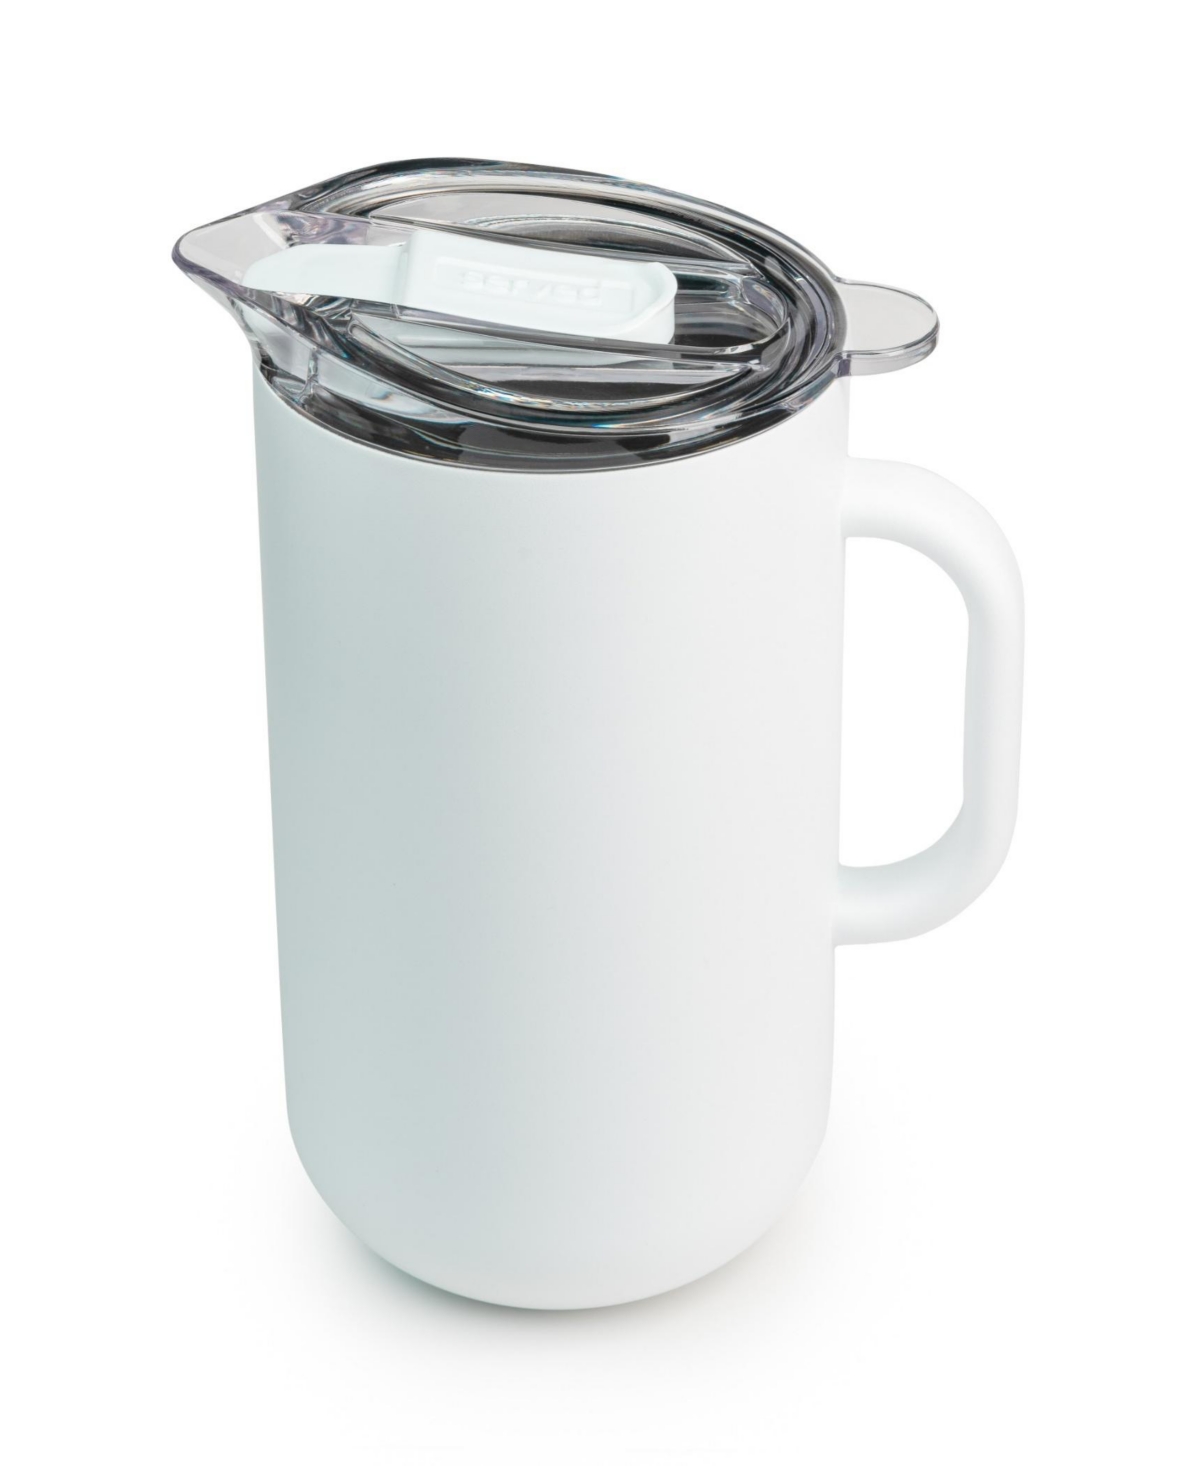 Served Vacuum-insulated Double-walled Copper-lined Stainless Steel Pitcher, 2 Liter In White Icing